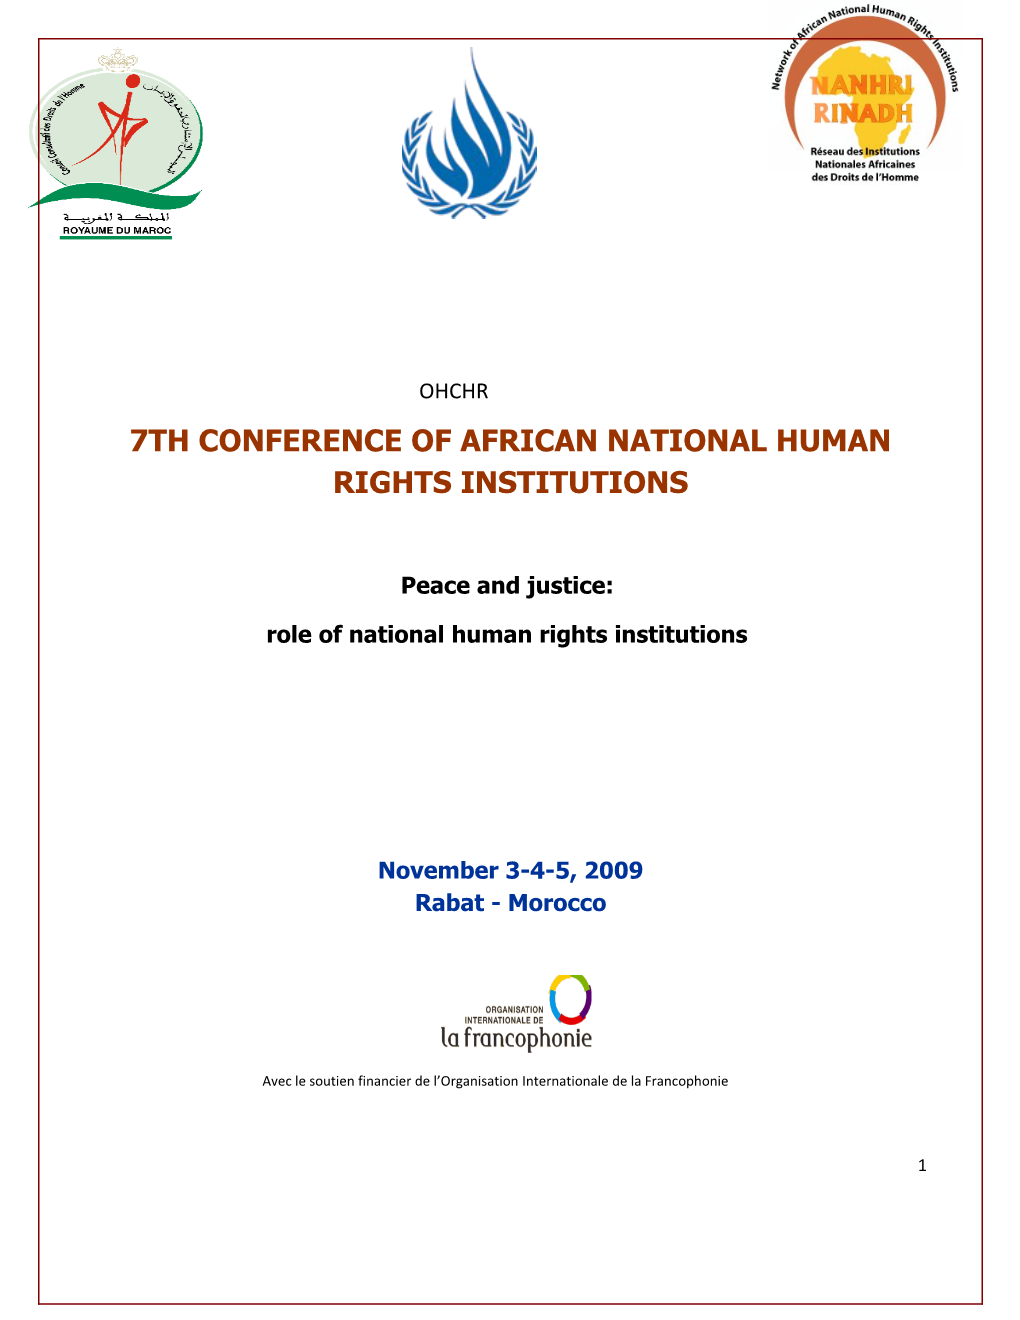 7Th Conference of African National Human Rights Institutions